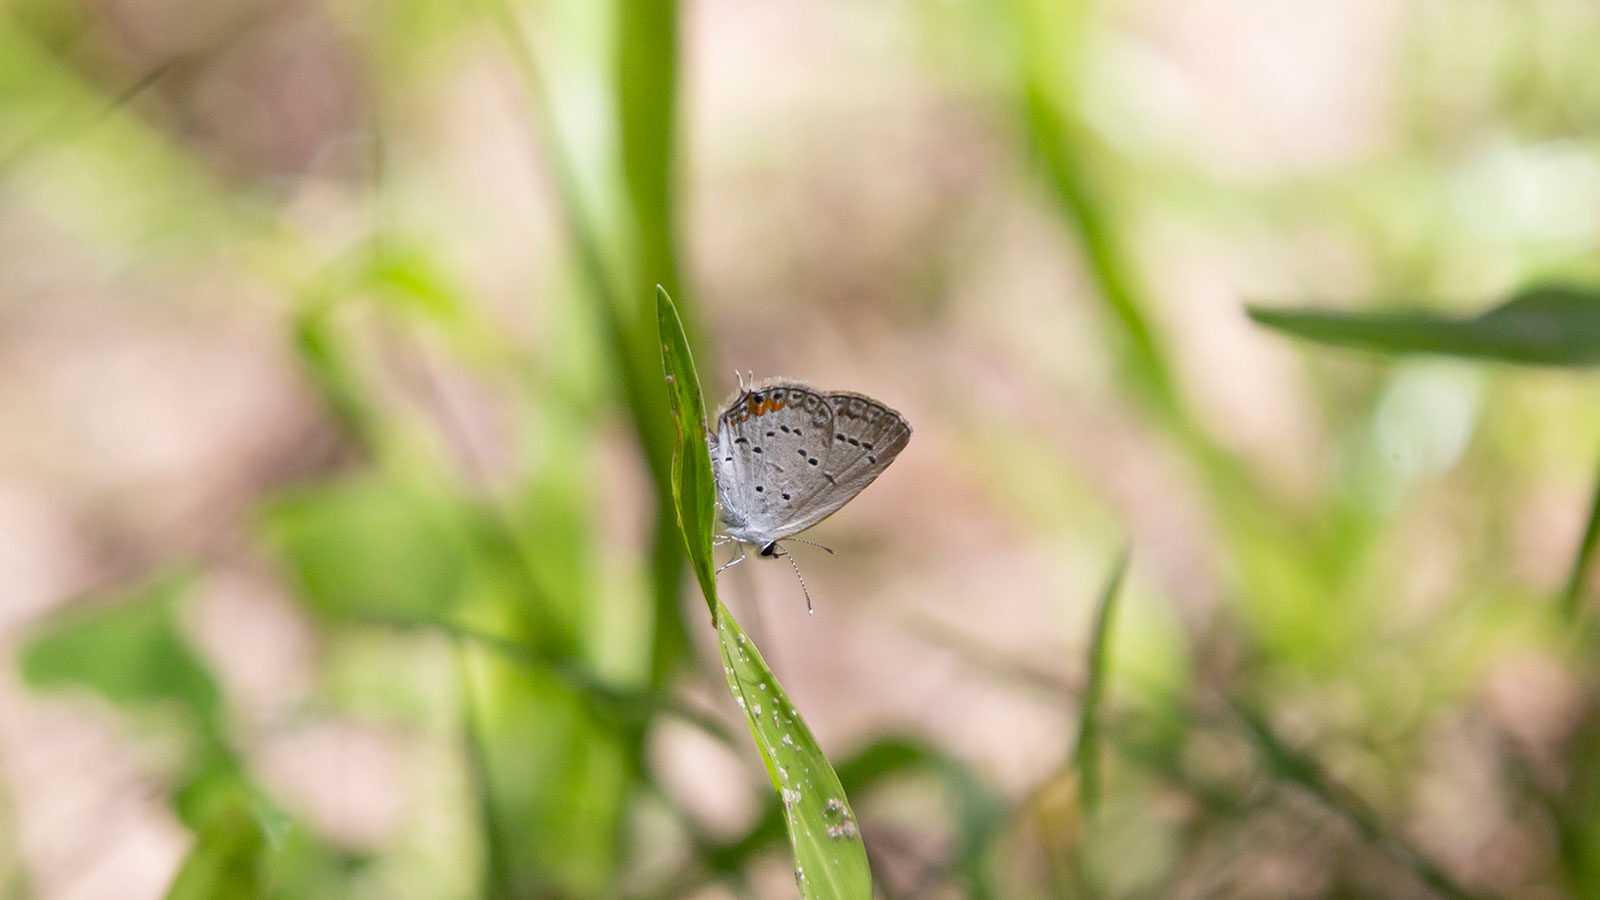 Eastern tailed-blue butterfly on a green blade of grass